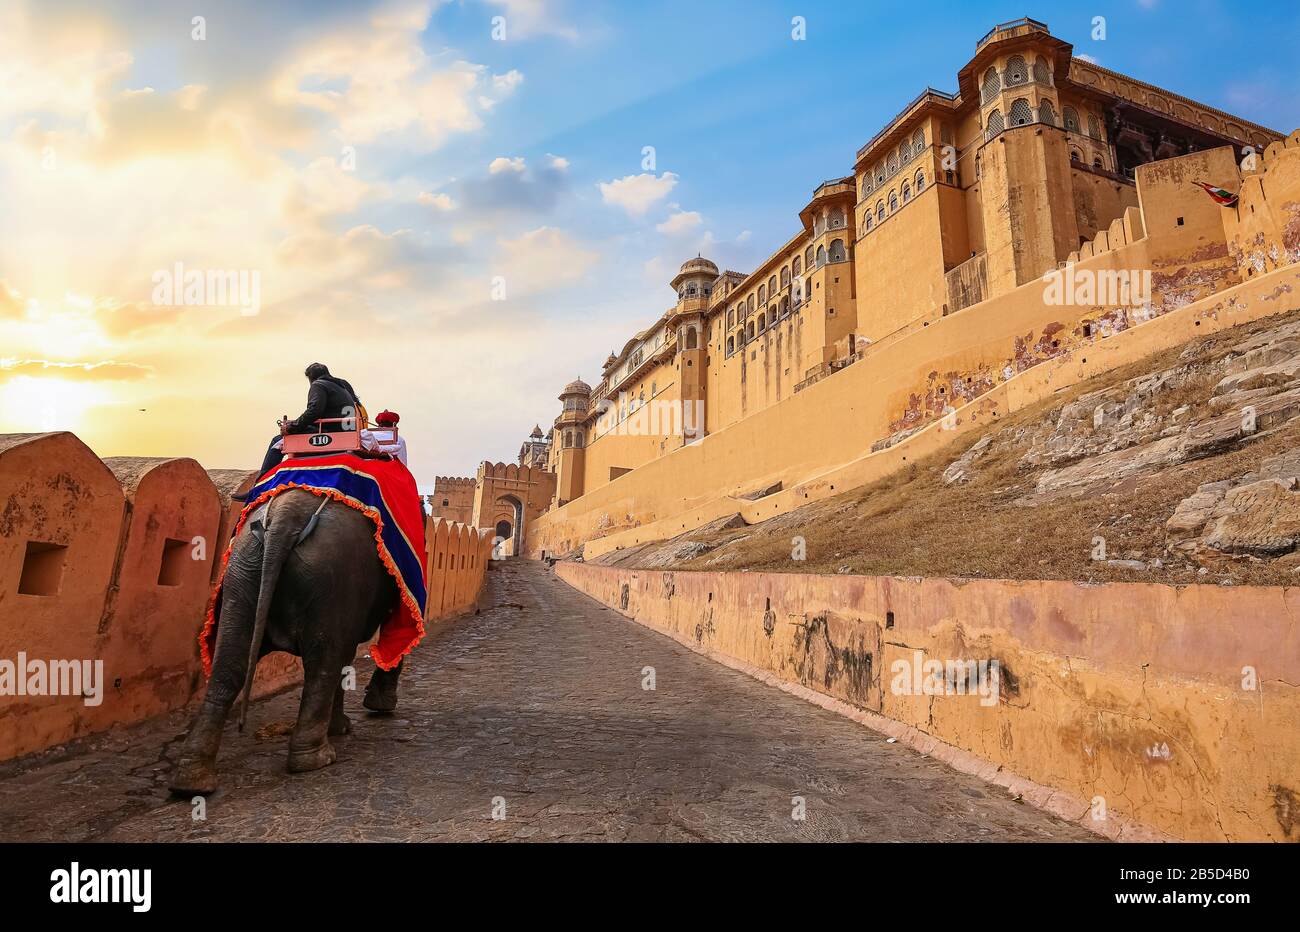 Amer Fort at Jaipur Rajasthan with view of decorated Indian elephant used for pleasure ride for tourist. Amber Fort is a UNESCO World Heritage site Stock Photo